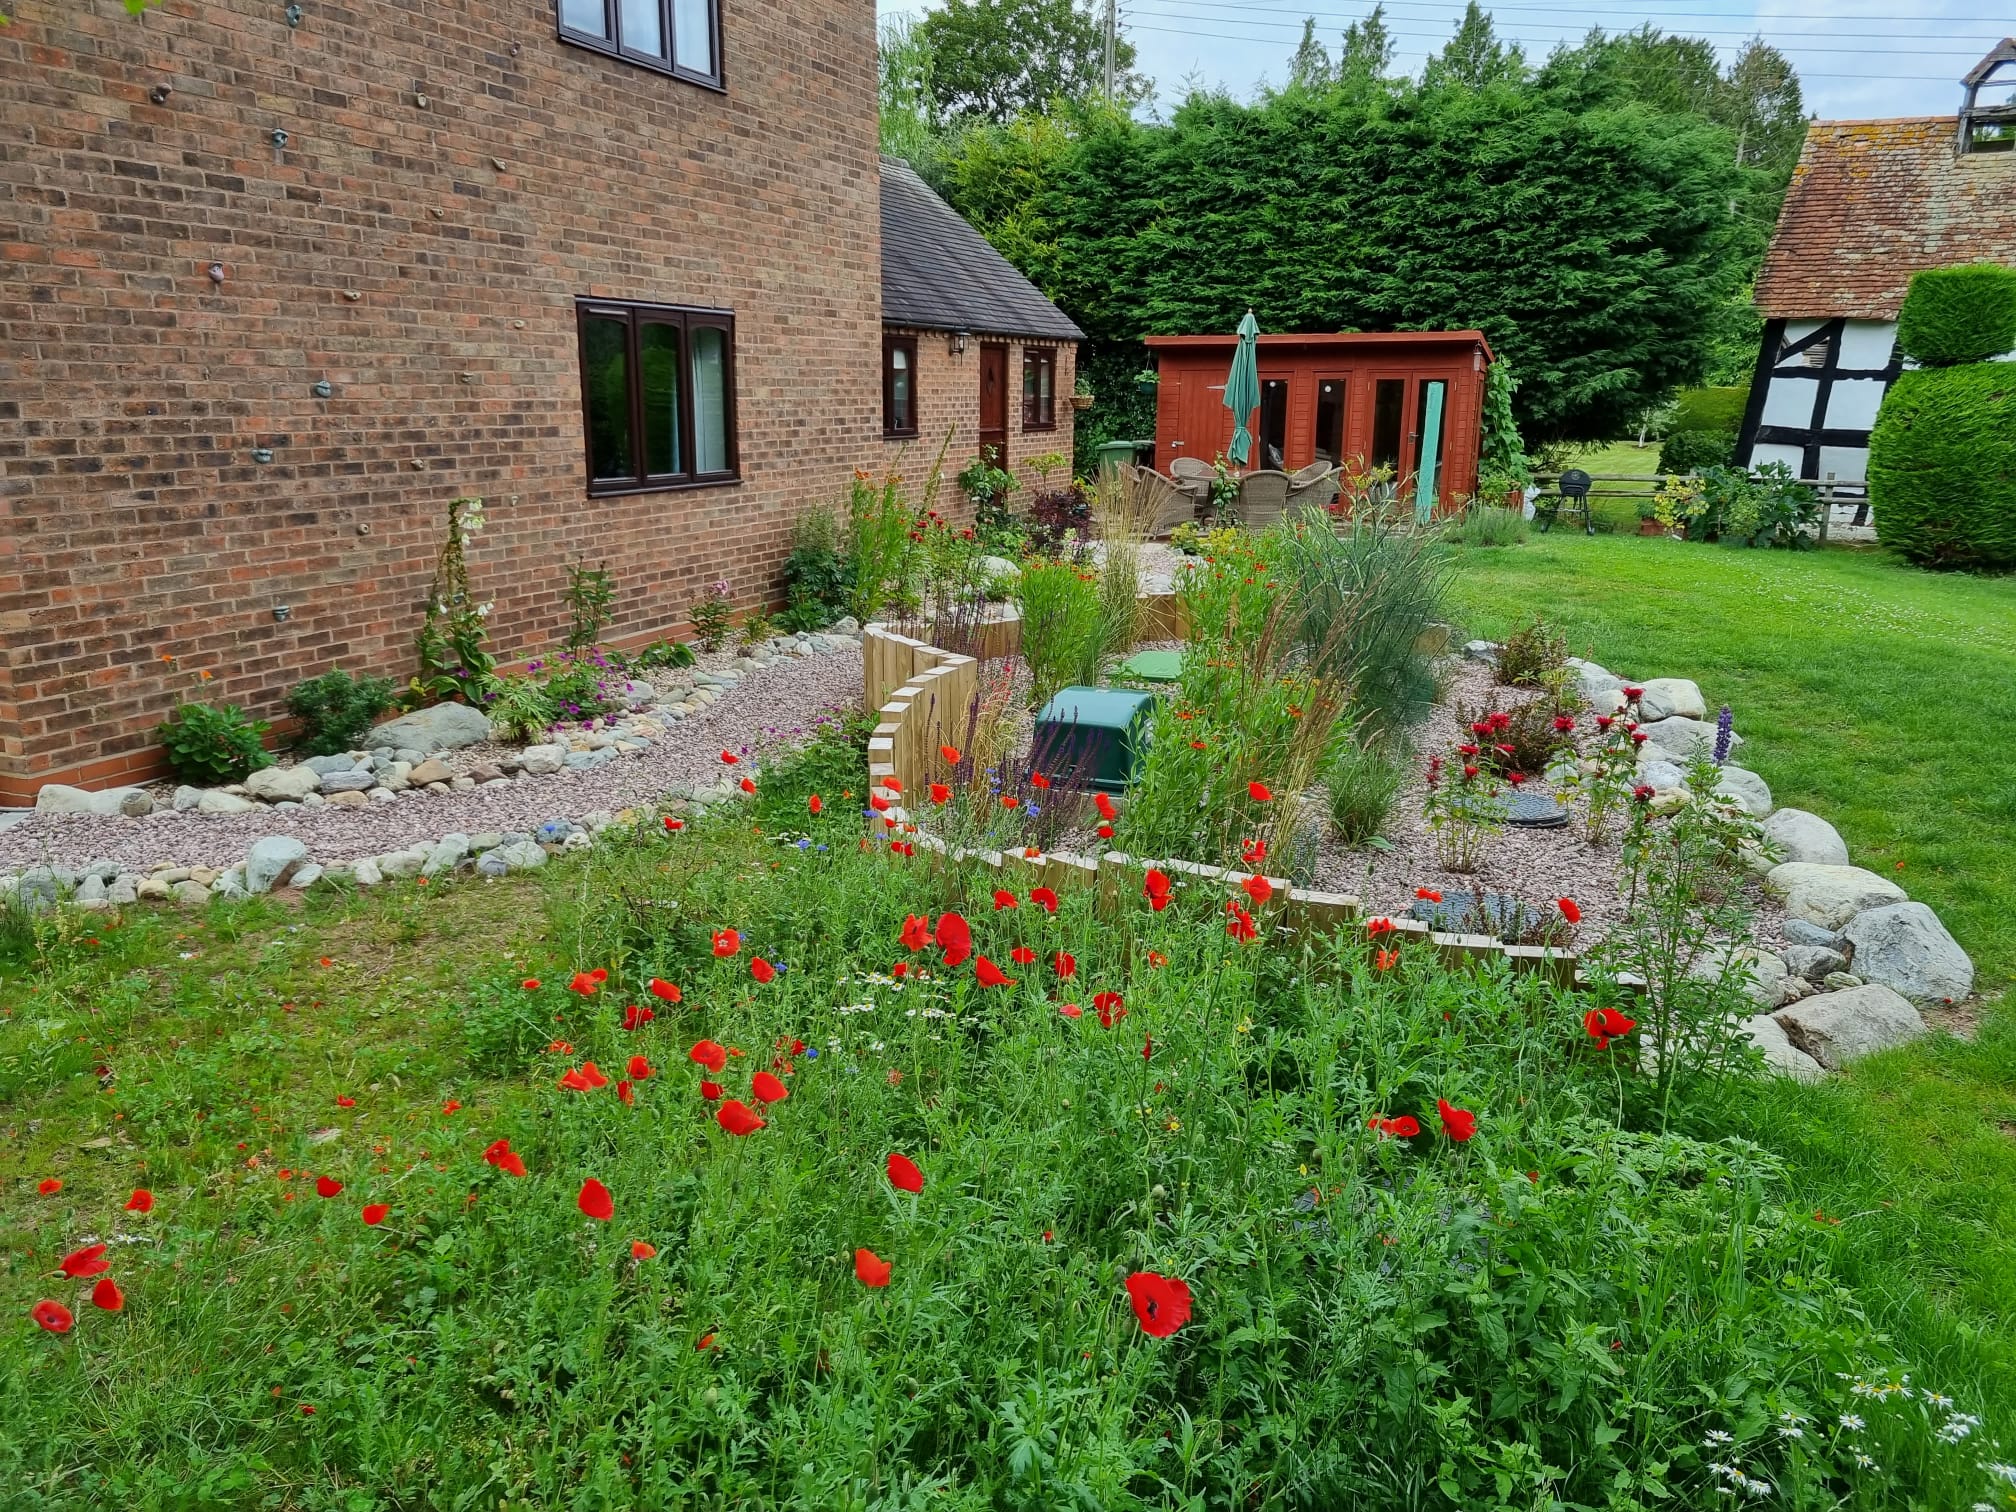 Roberts garden design - stoned flower bed and planted poppies